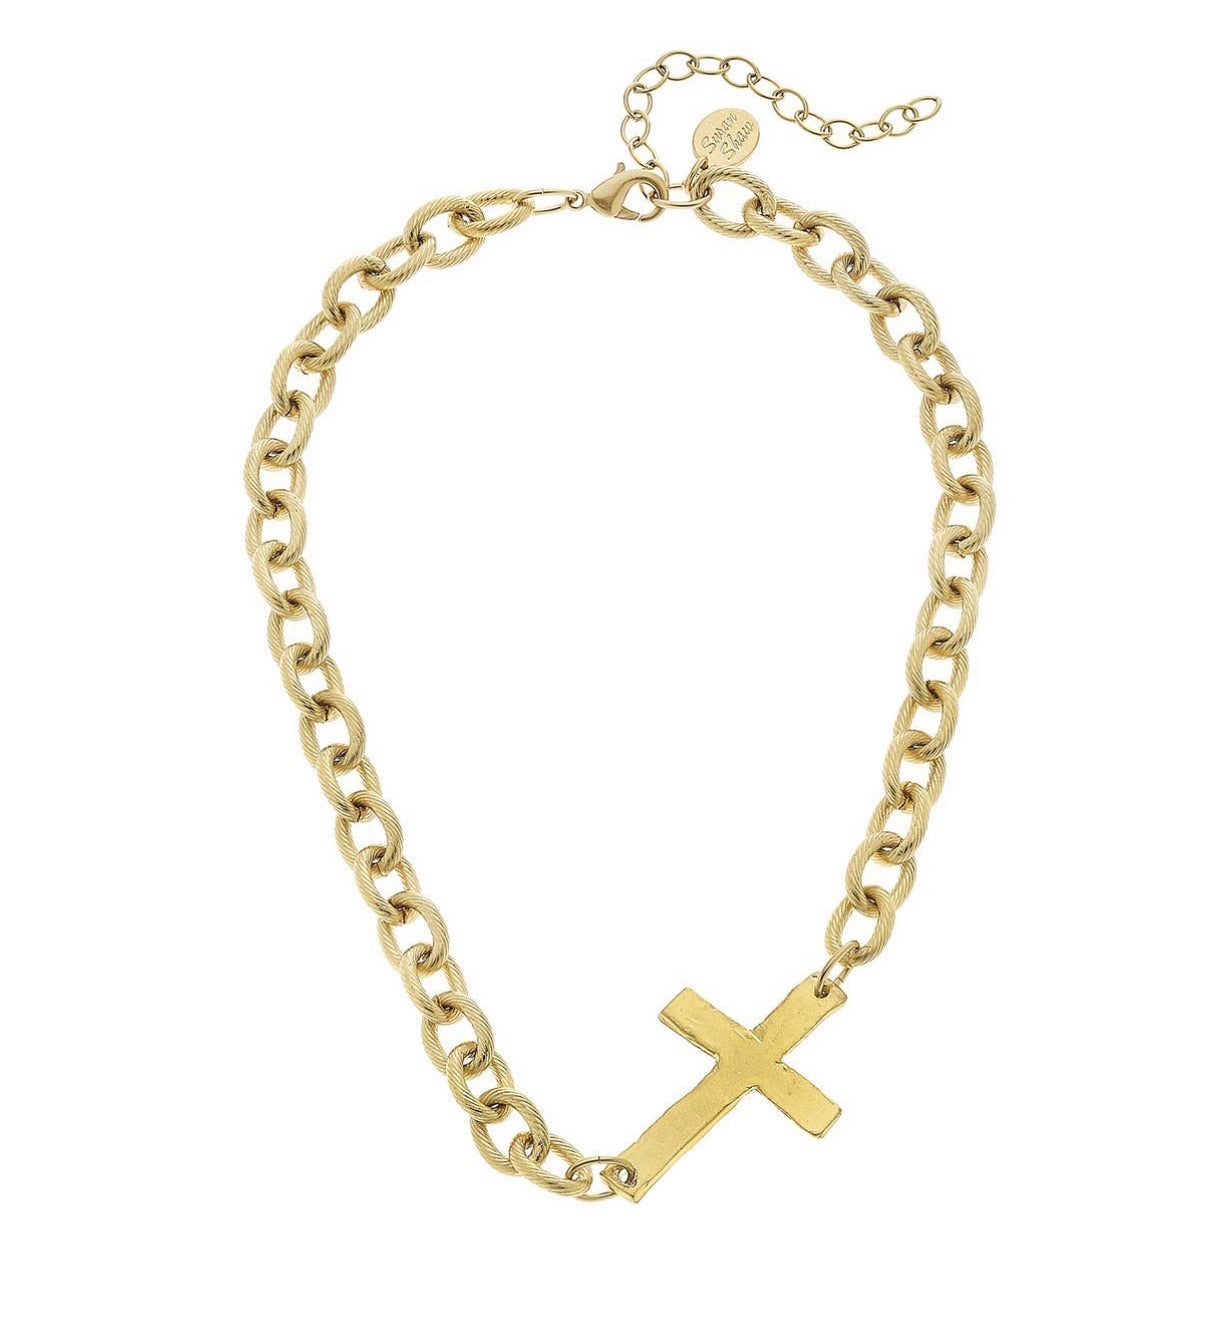 Gold Sideways Cross Necklace by Susan Shaw - Corinne an Affordable Women's Clothing Boutique in the US USA